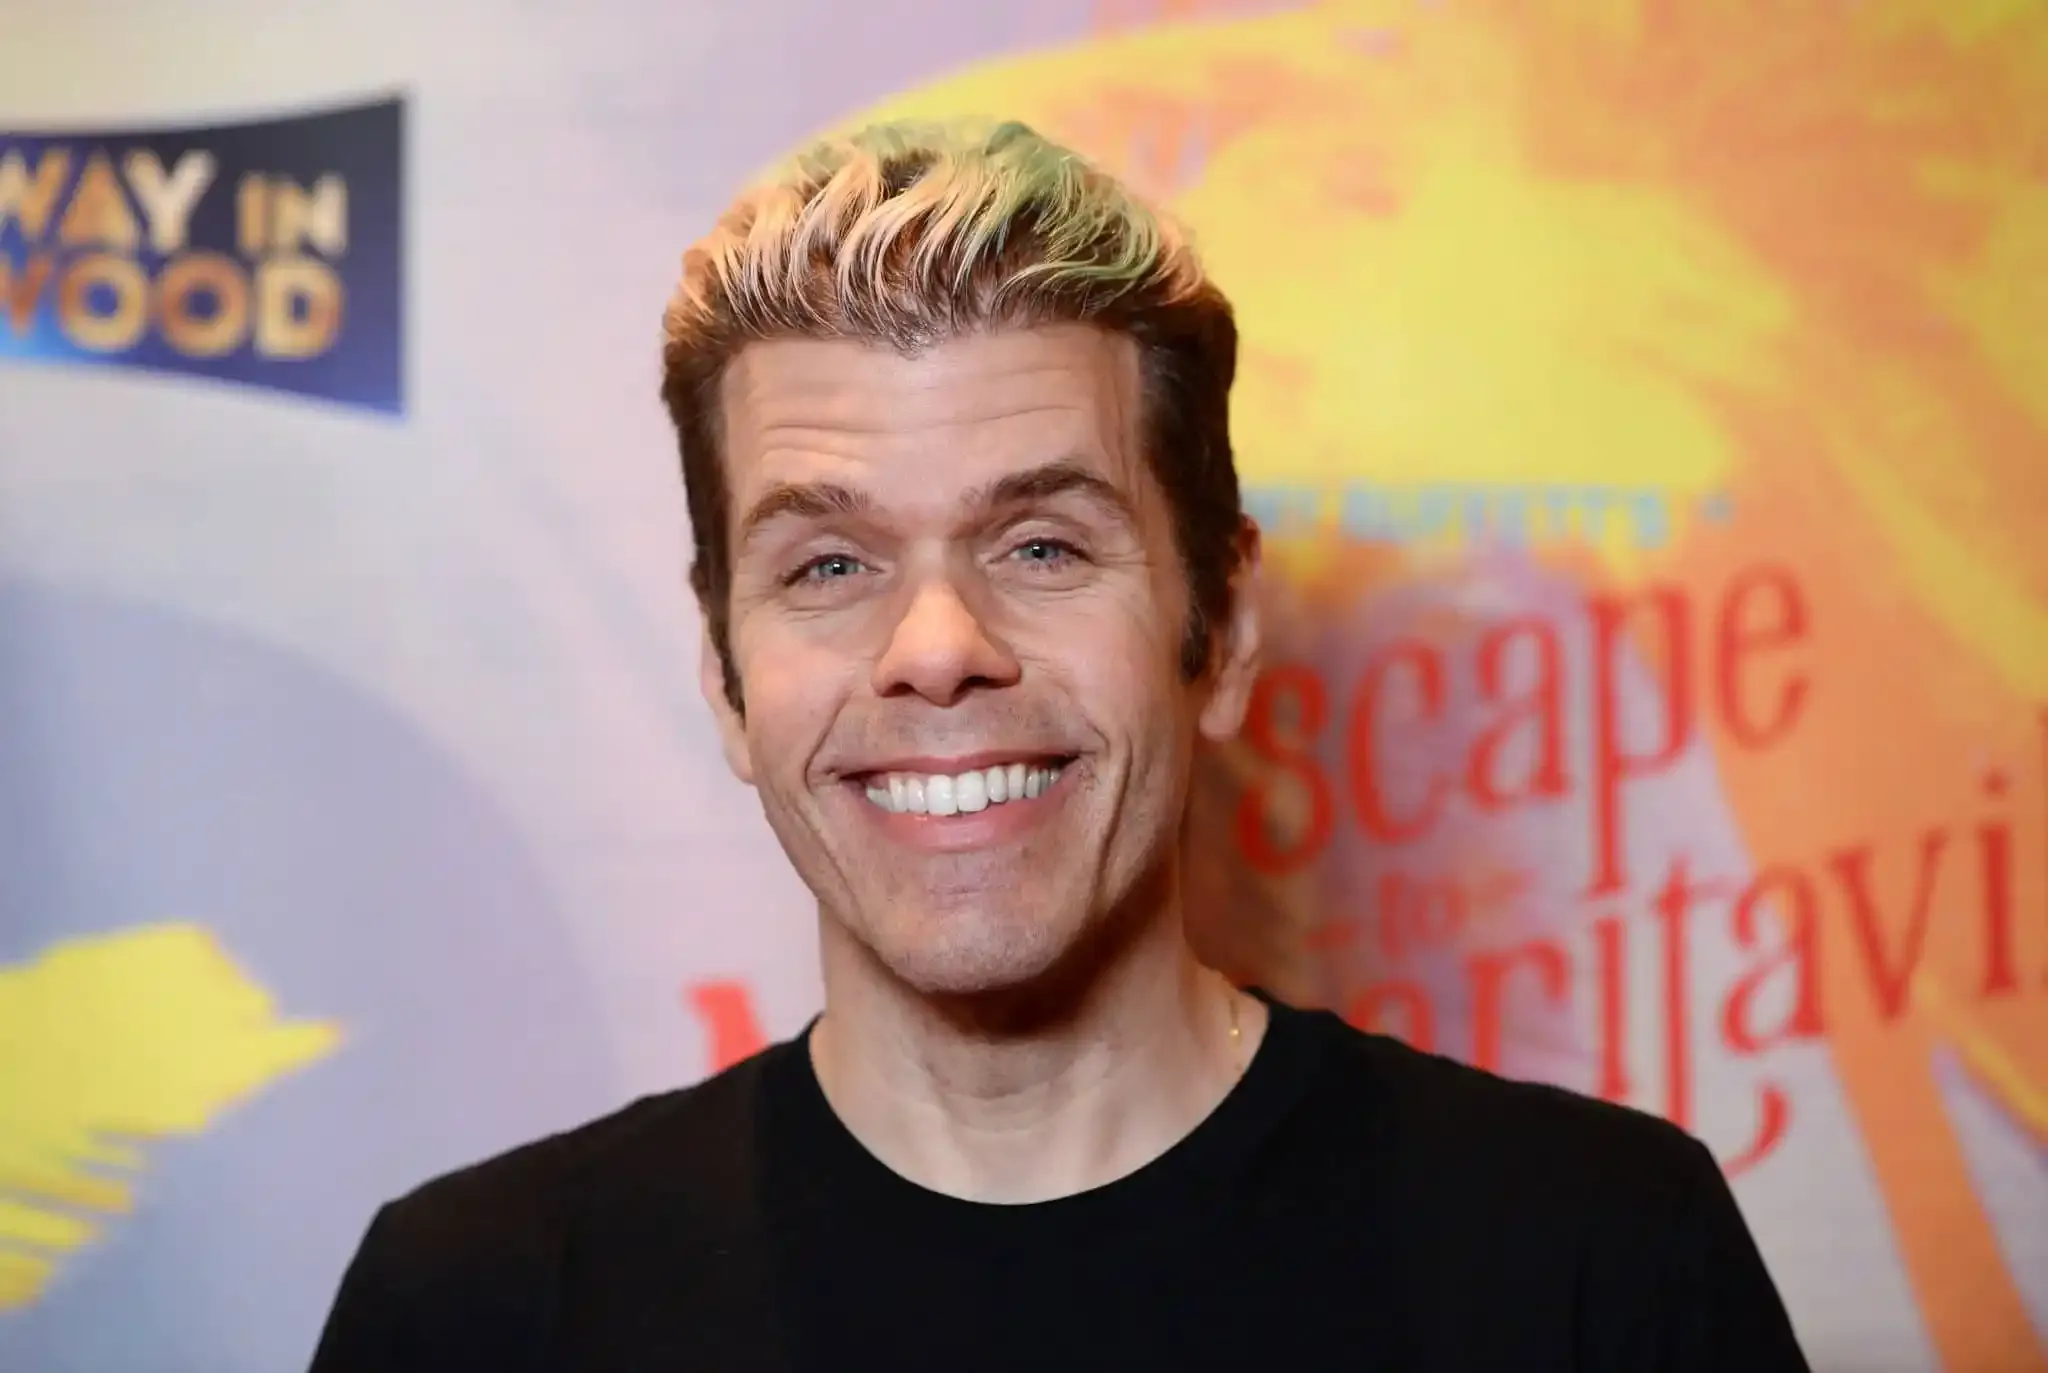 Who is Perez Hilton's Partner? Is He Married or Single?